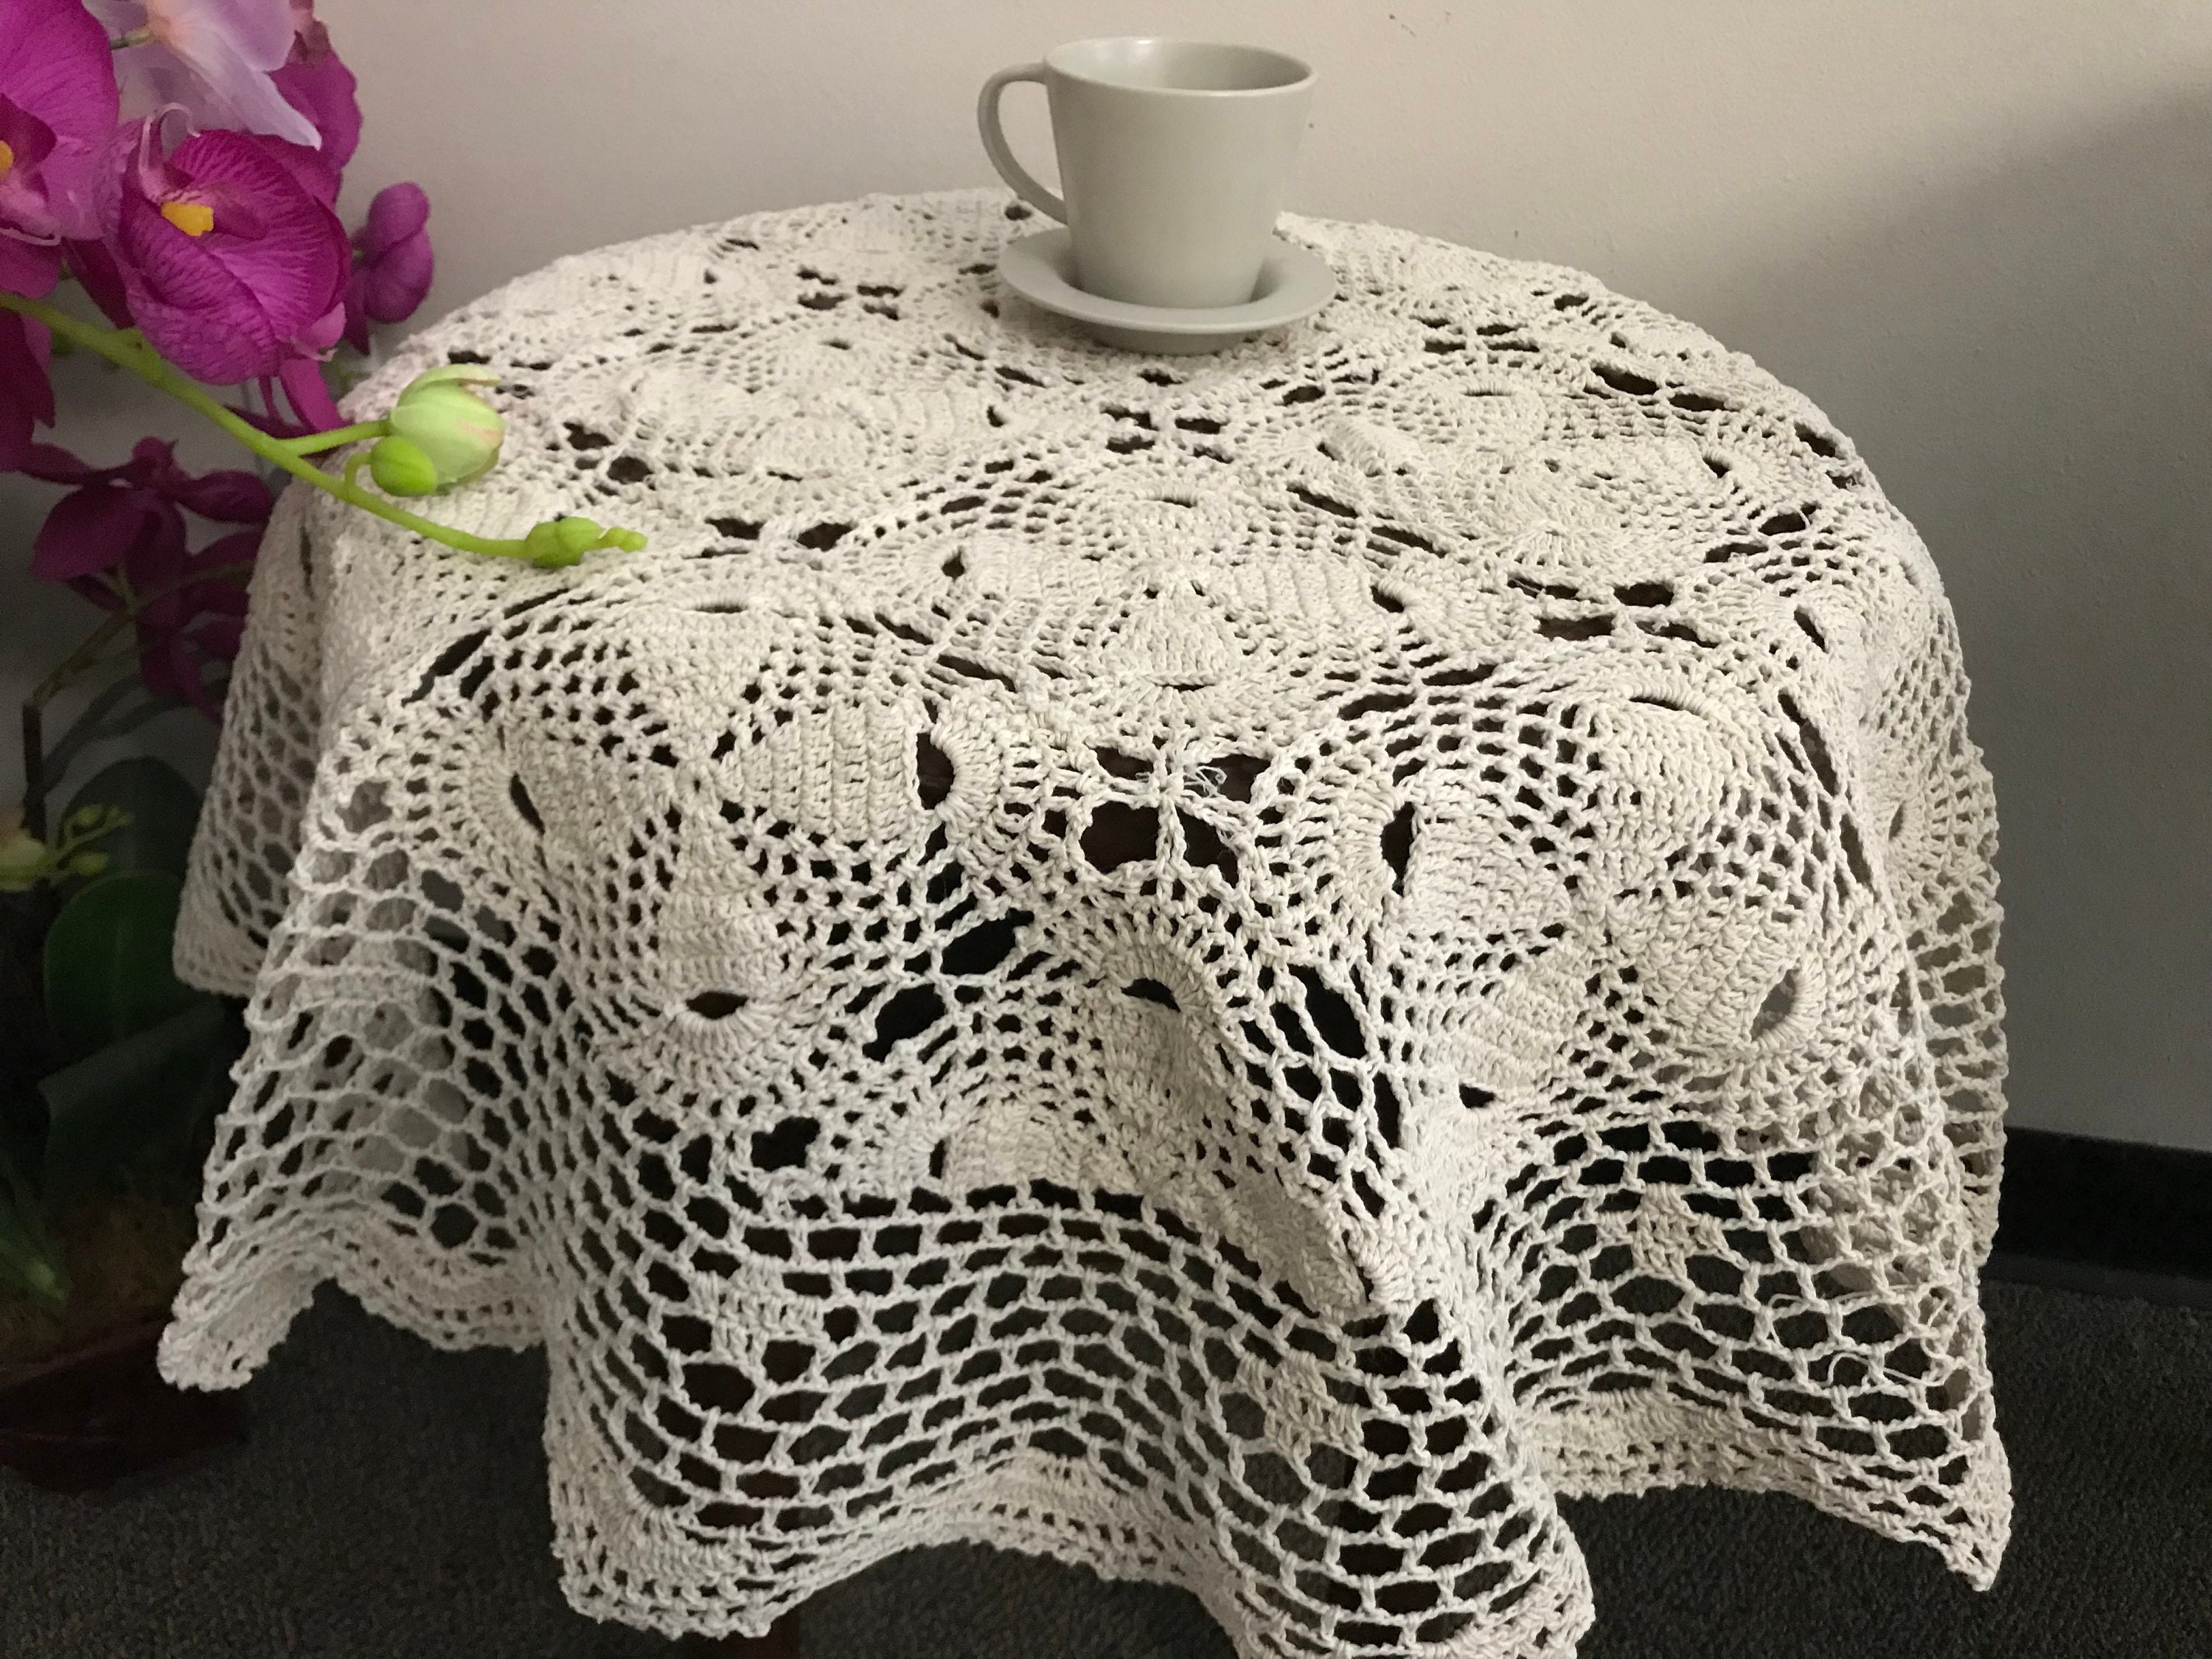 Hsvanyr Crocheted Dollies Dresser Top Protector Elegant Tablecloths Cover  for Parties Banquet 12x59 inch Centerpiece Anniversary Housewarming Gift